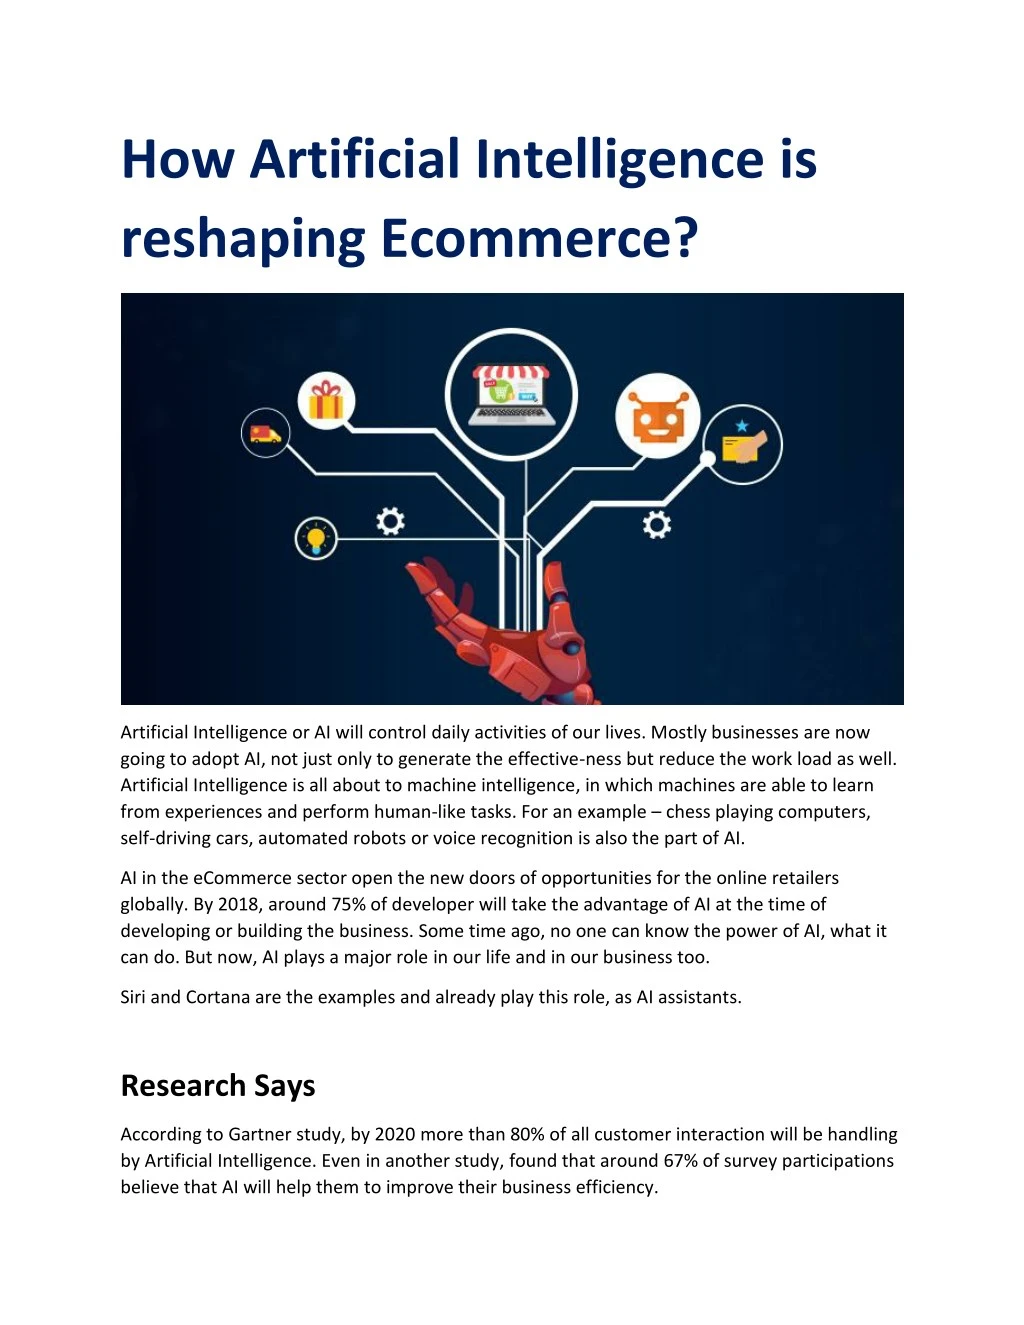 how artificial intelligence is reshaping ecommerce